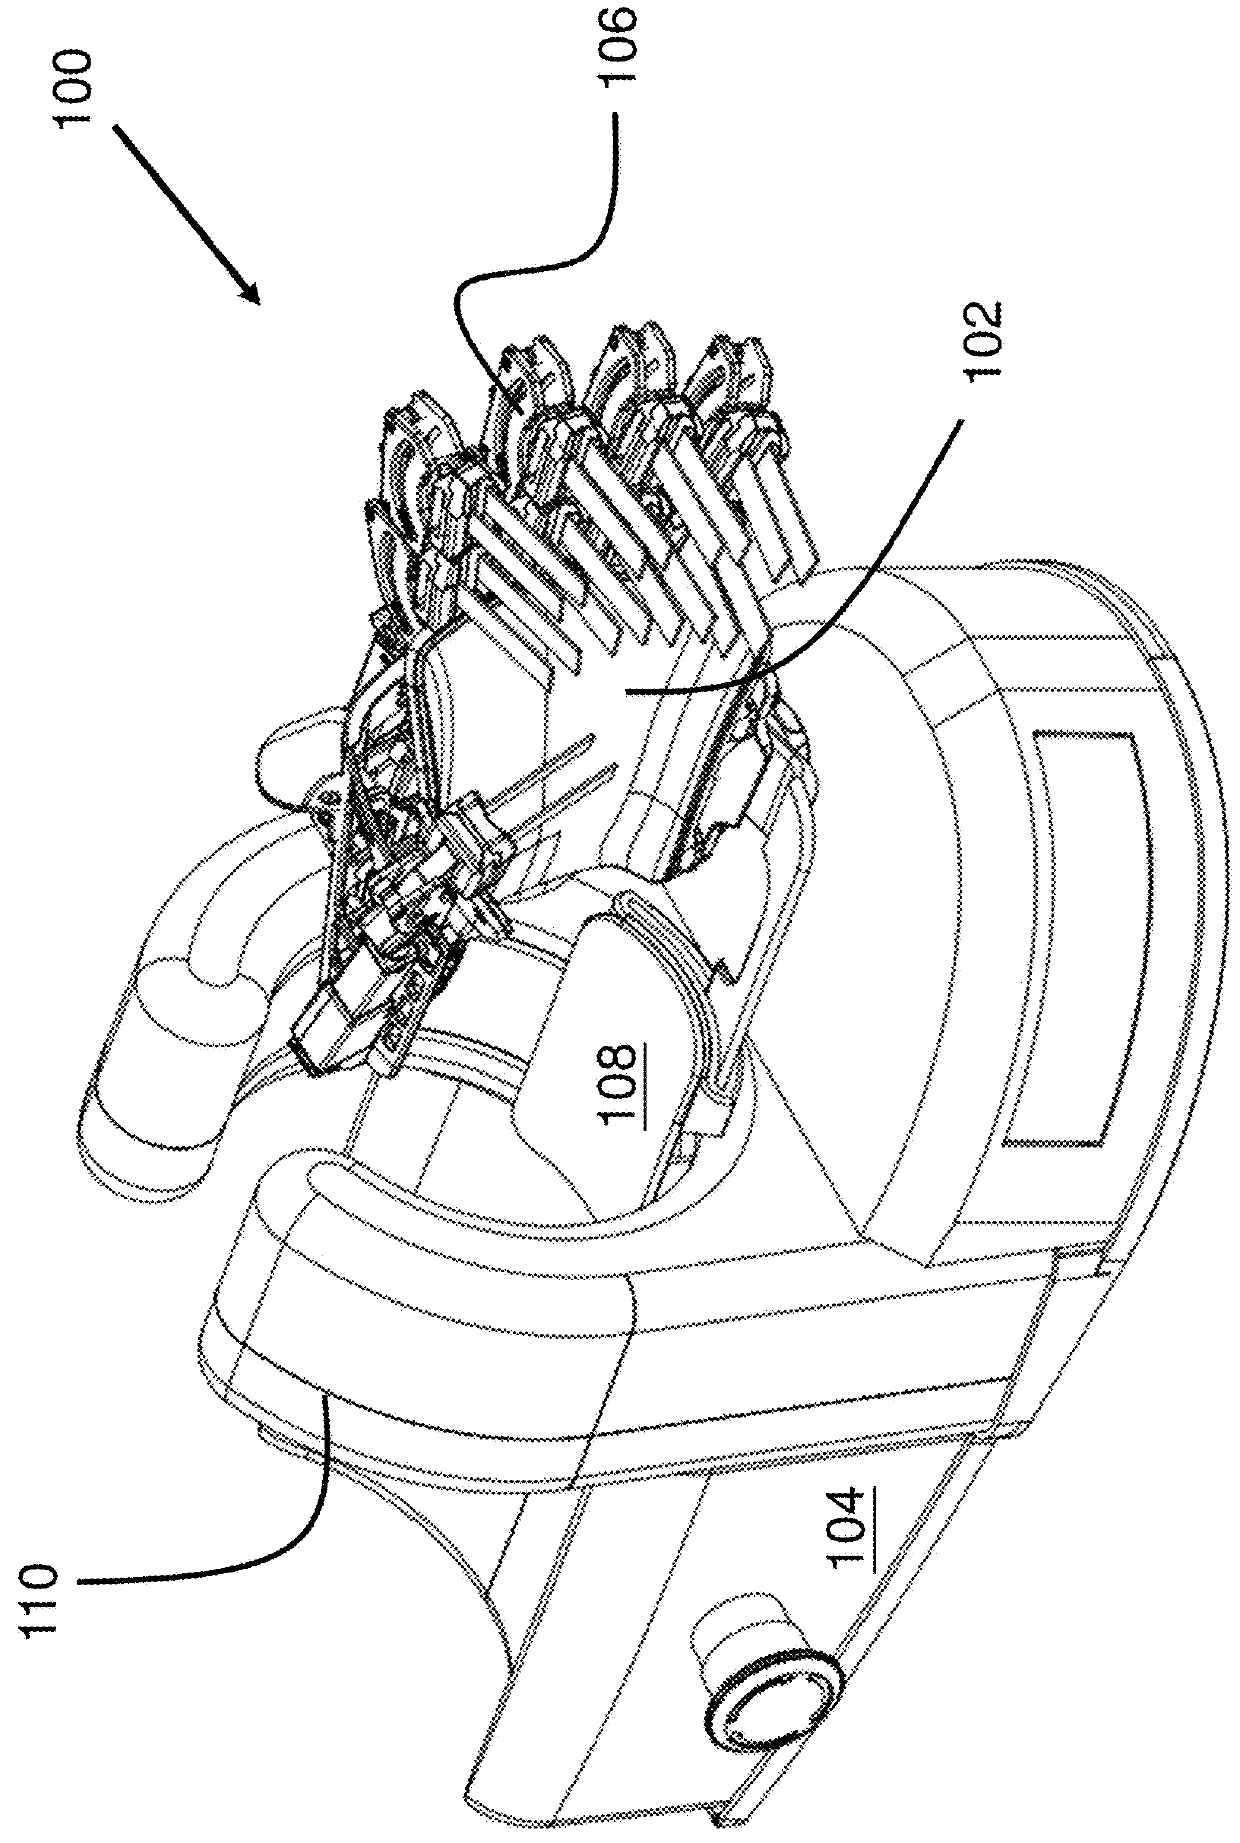 Power Assistive Device For Hand Rehabilitation And A Method of Using The Same